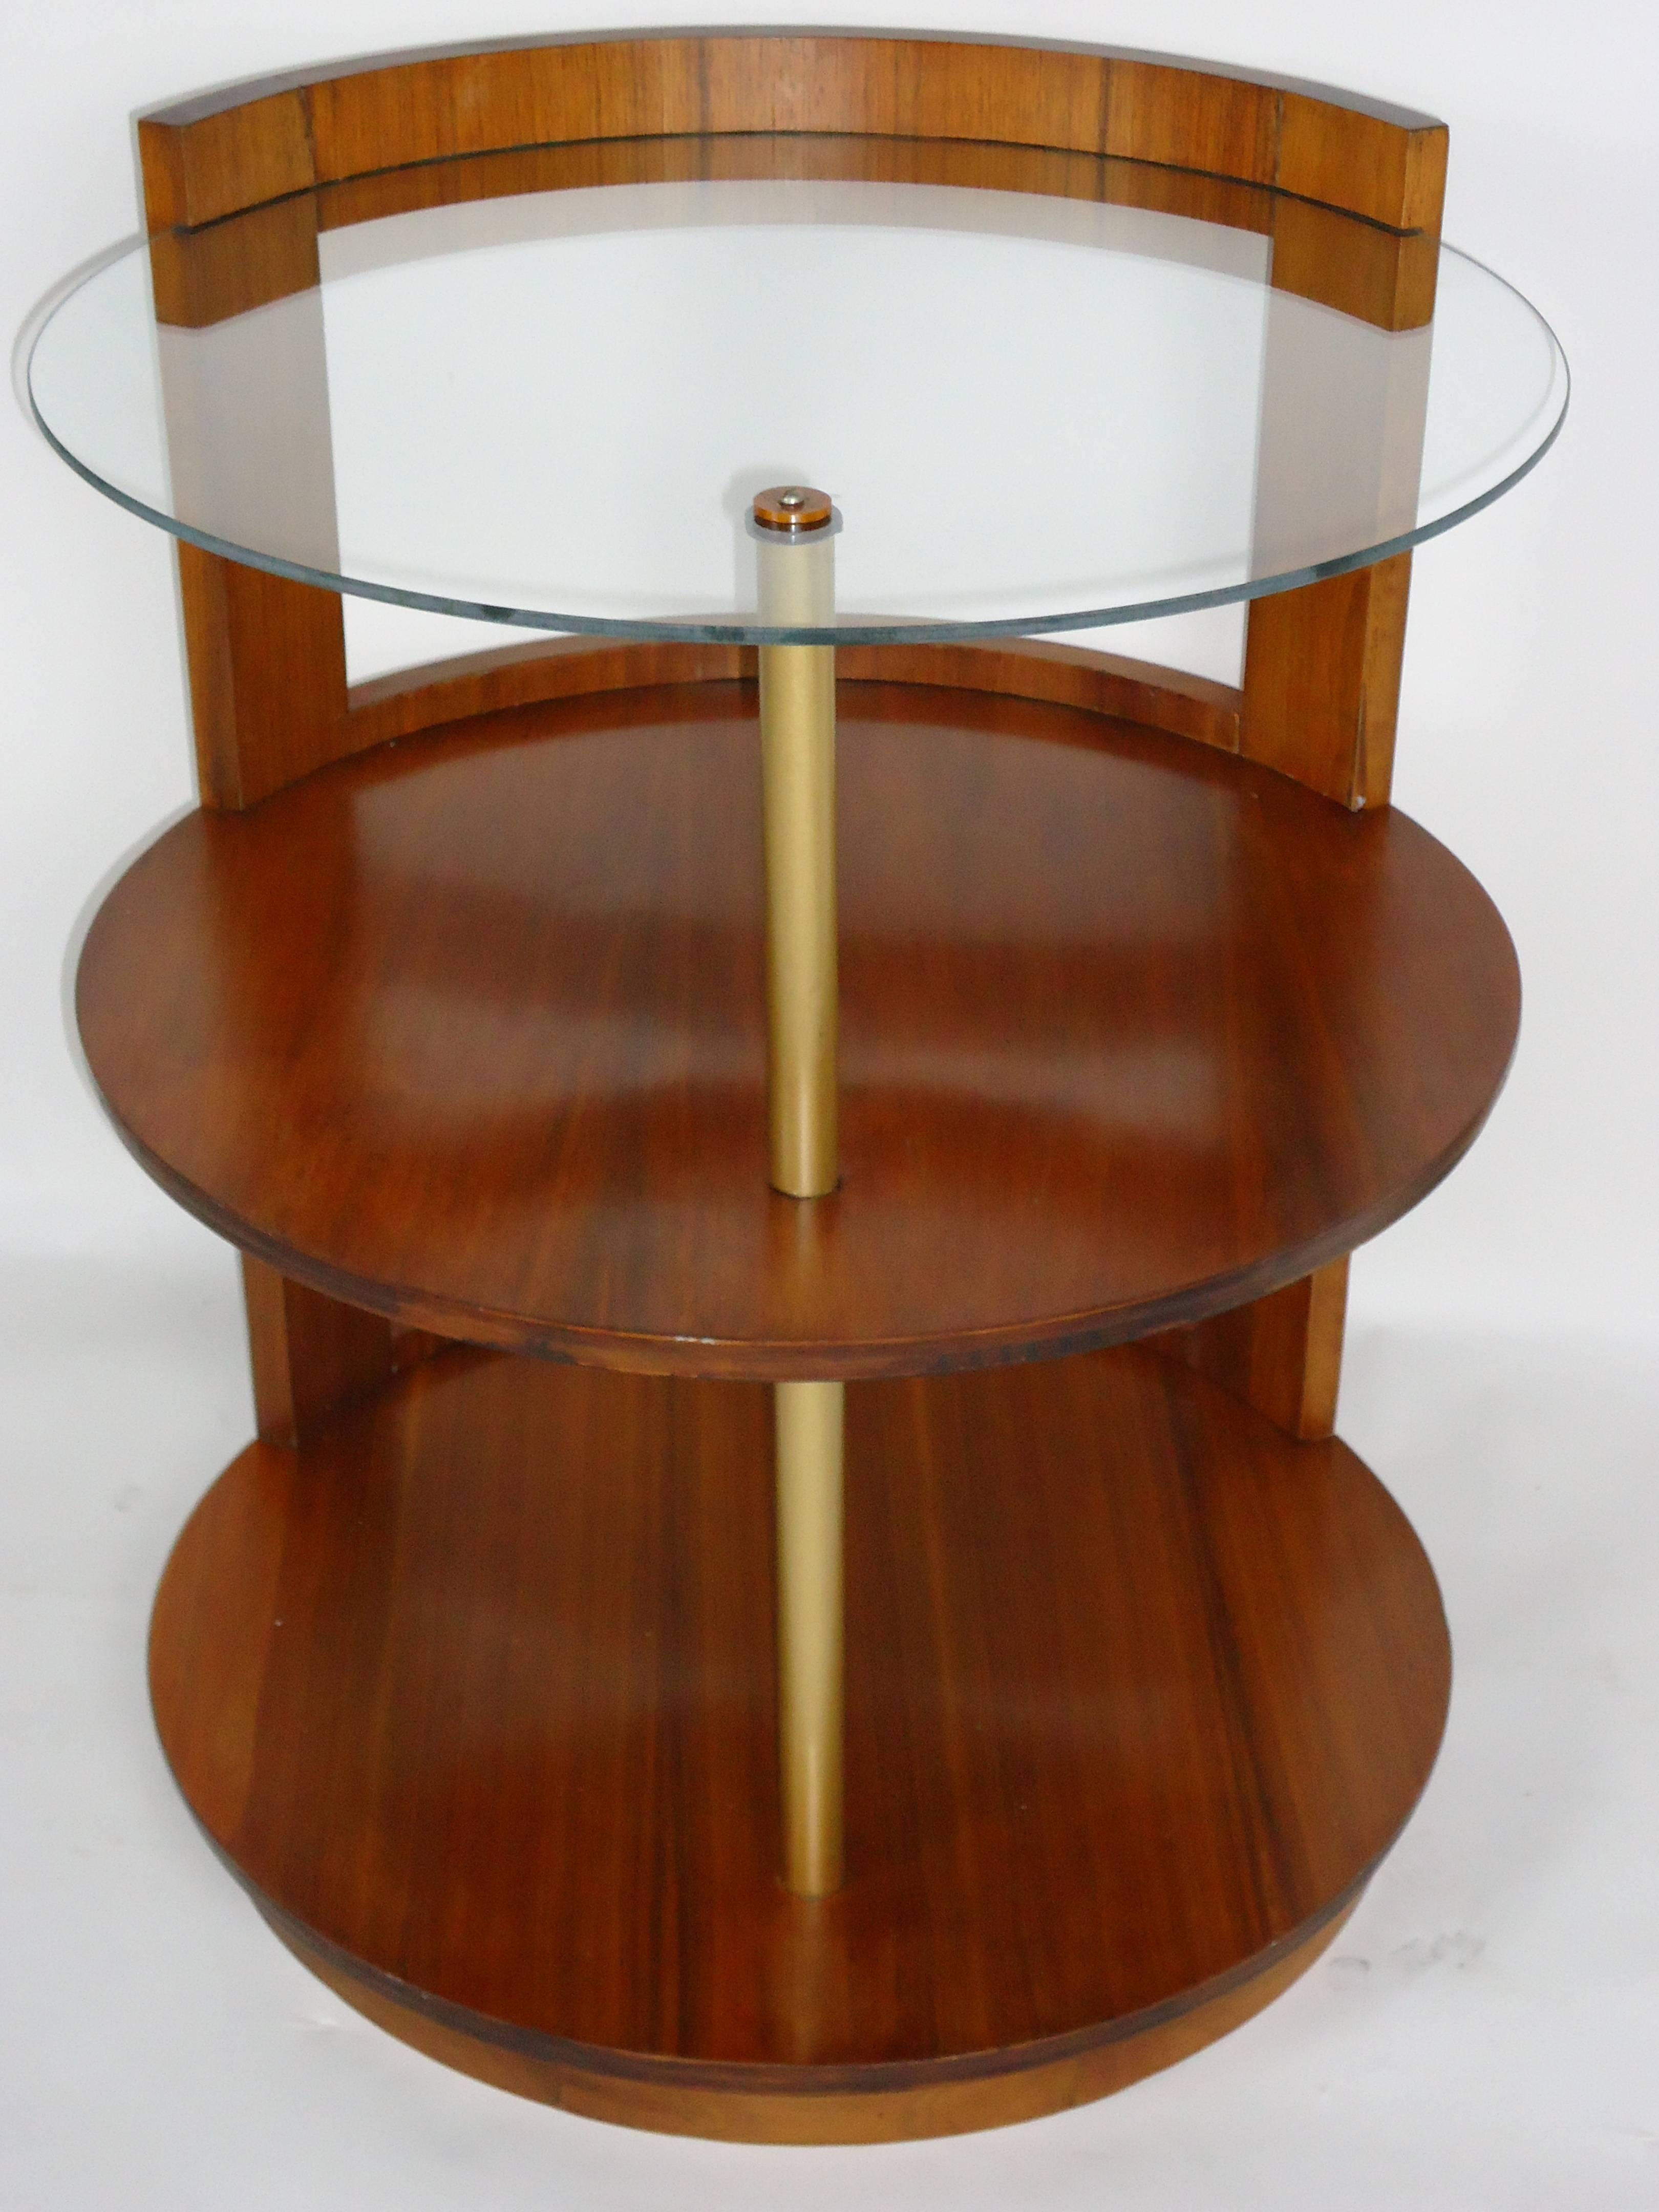 A rare Gilbert Rohde three-tier walnut side table or nightstand designed for Herman Miller in the late 1930s.
An unusual design because of its cut-out back.
The table has a replaced glass top shelf and is in excellent condition.
 